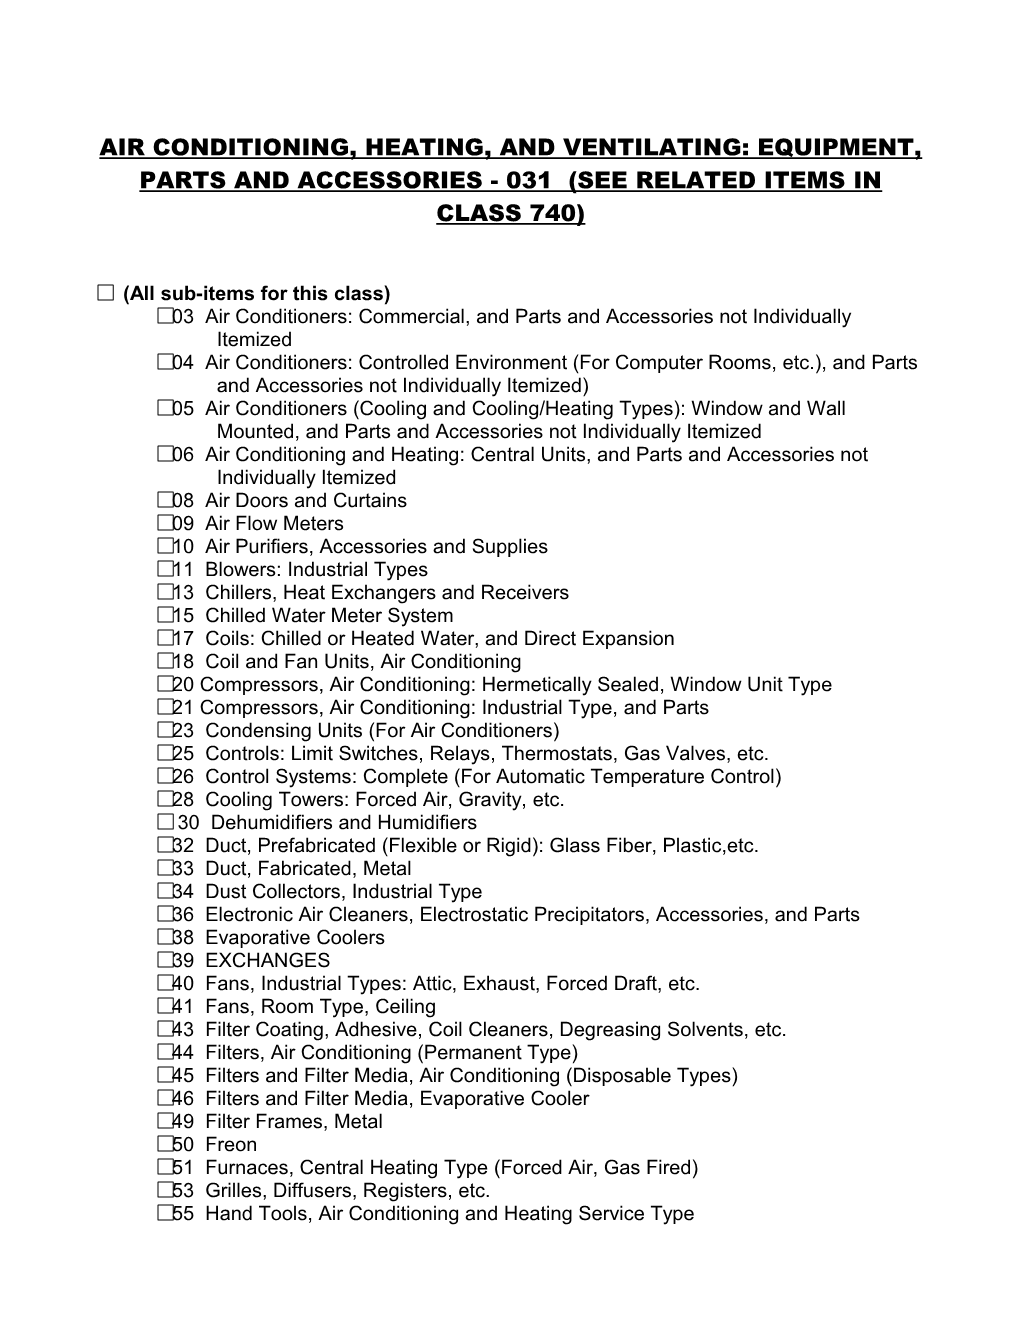 Air Conditioning, Heating, and Ventilating: Equipment, Parts and Accessories 031 - (See